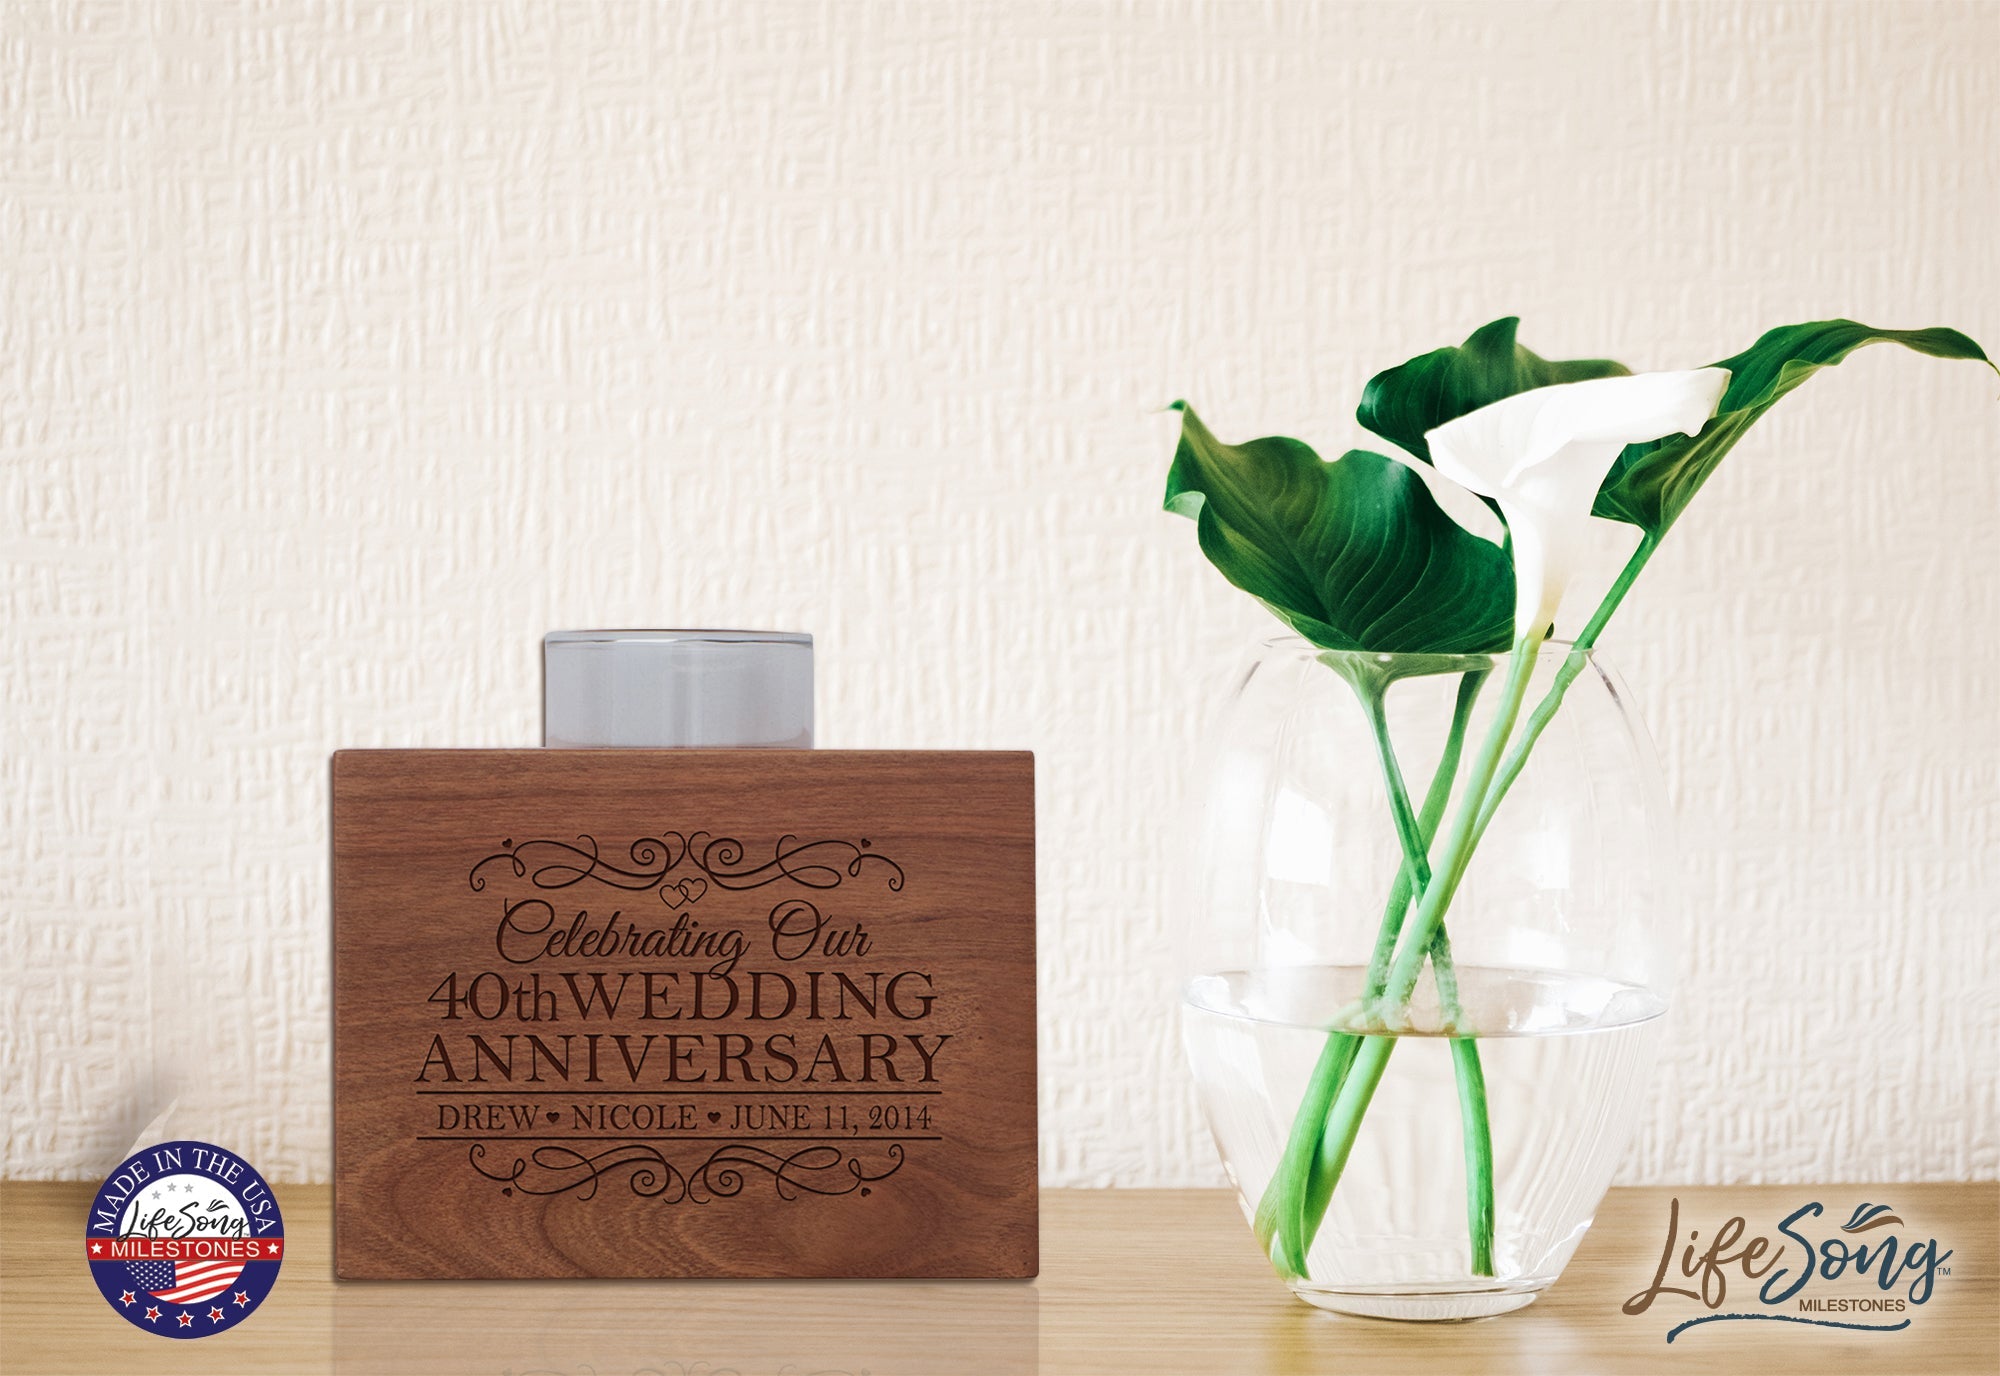 Personalized Cherry Wood Single Votive Candle Holder - 40th Wedding Anniversary - LifeSong Milestones